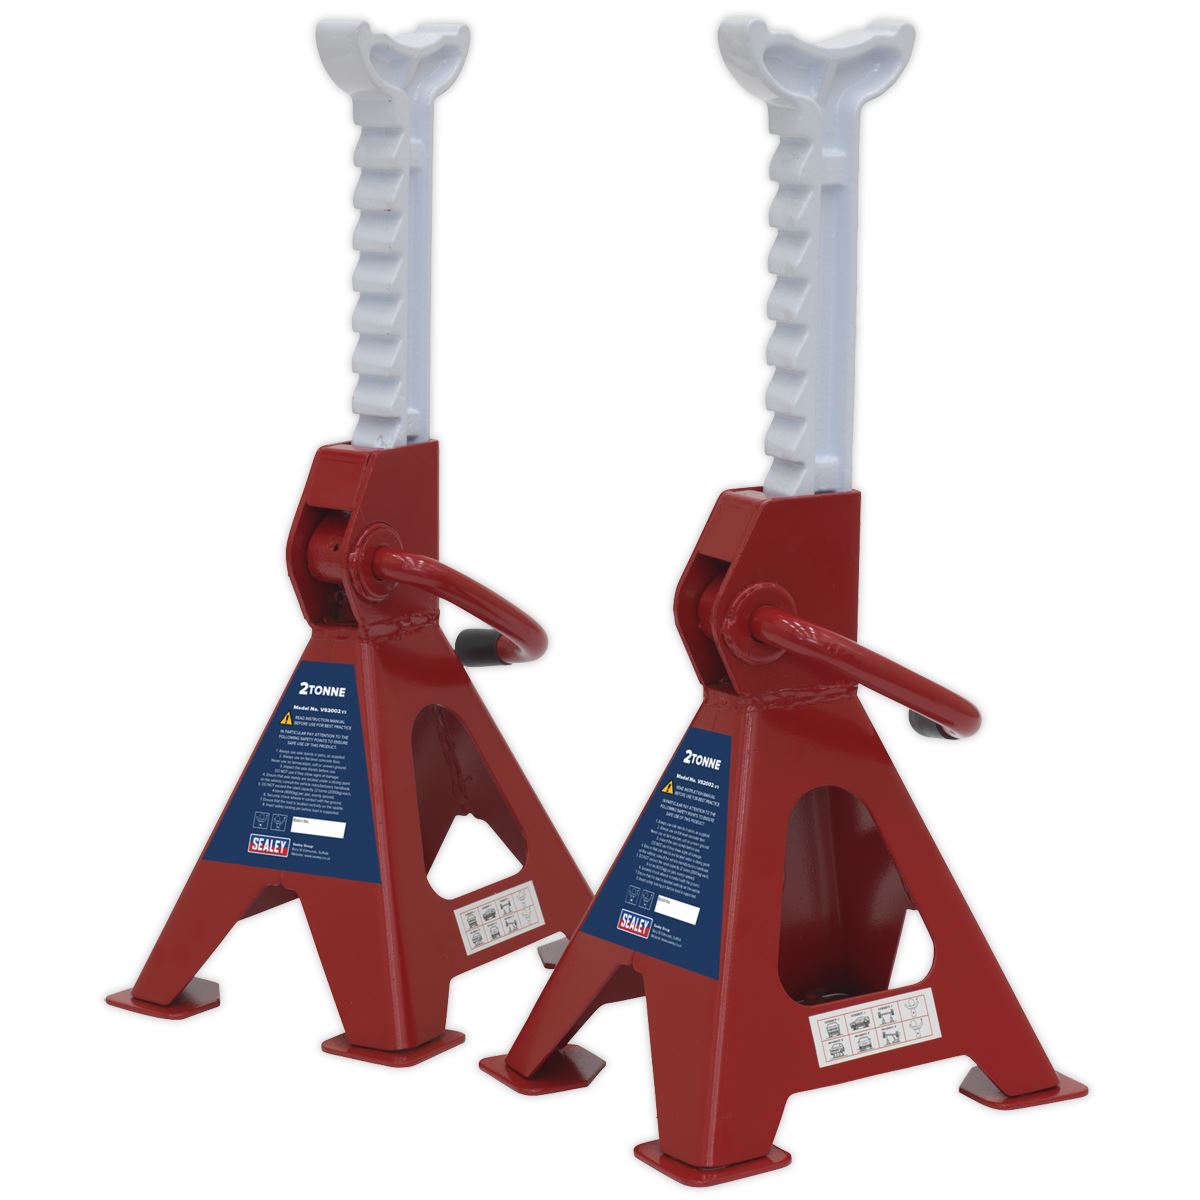 Sealey Axle Stands (Pair) 2 Tonne Capacity per Stand Ratchet Type